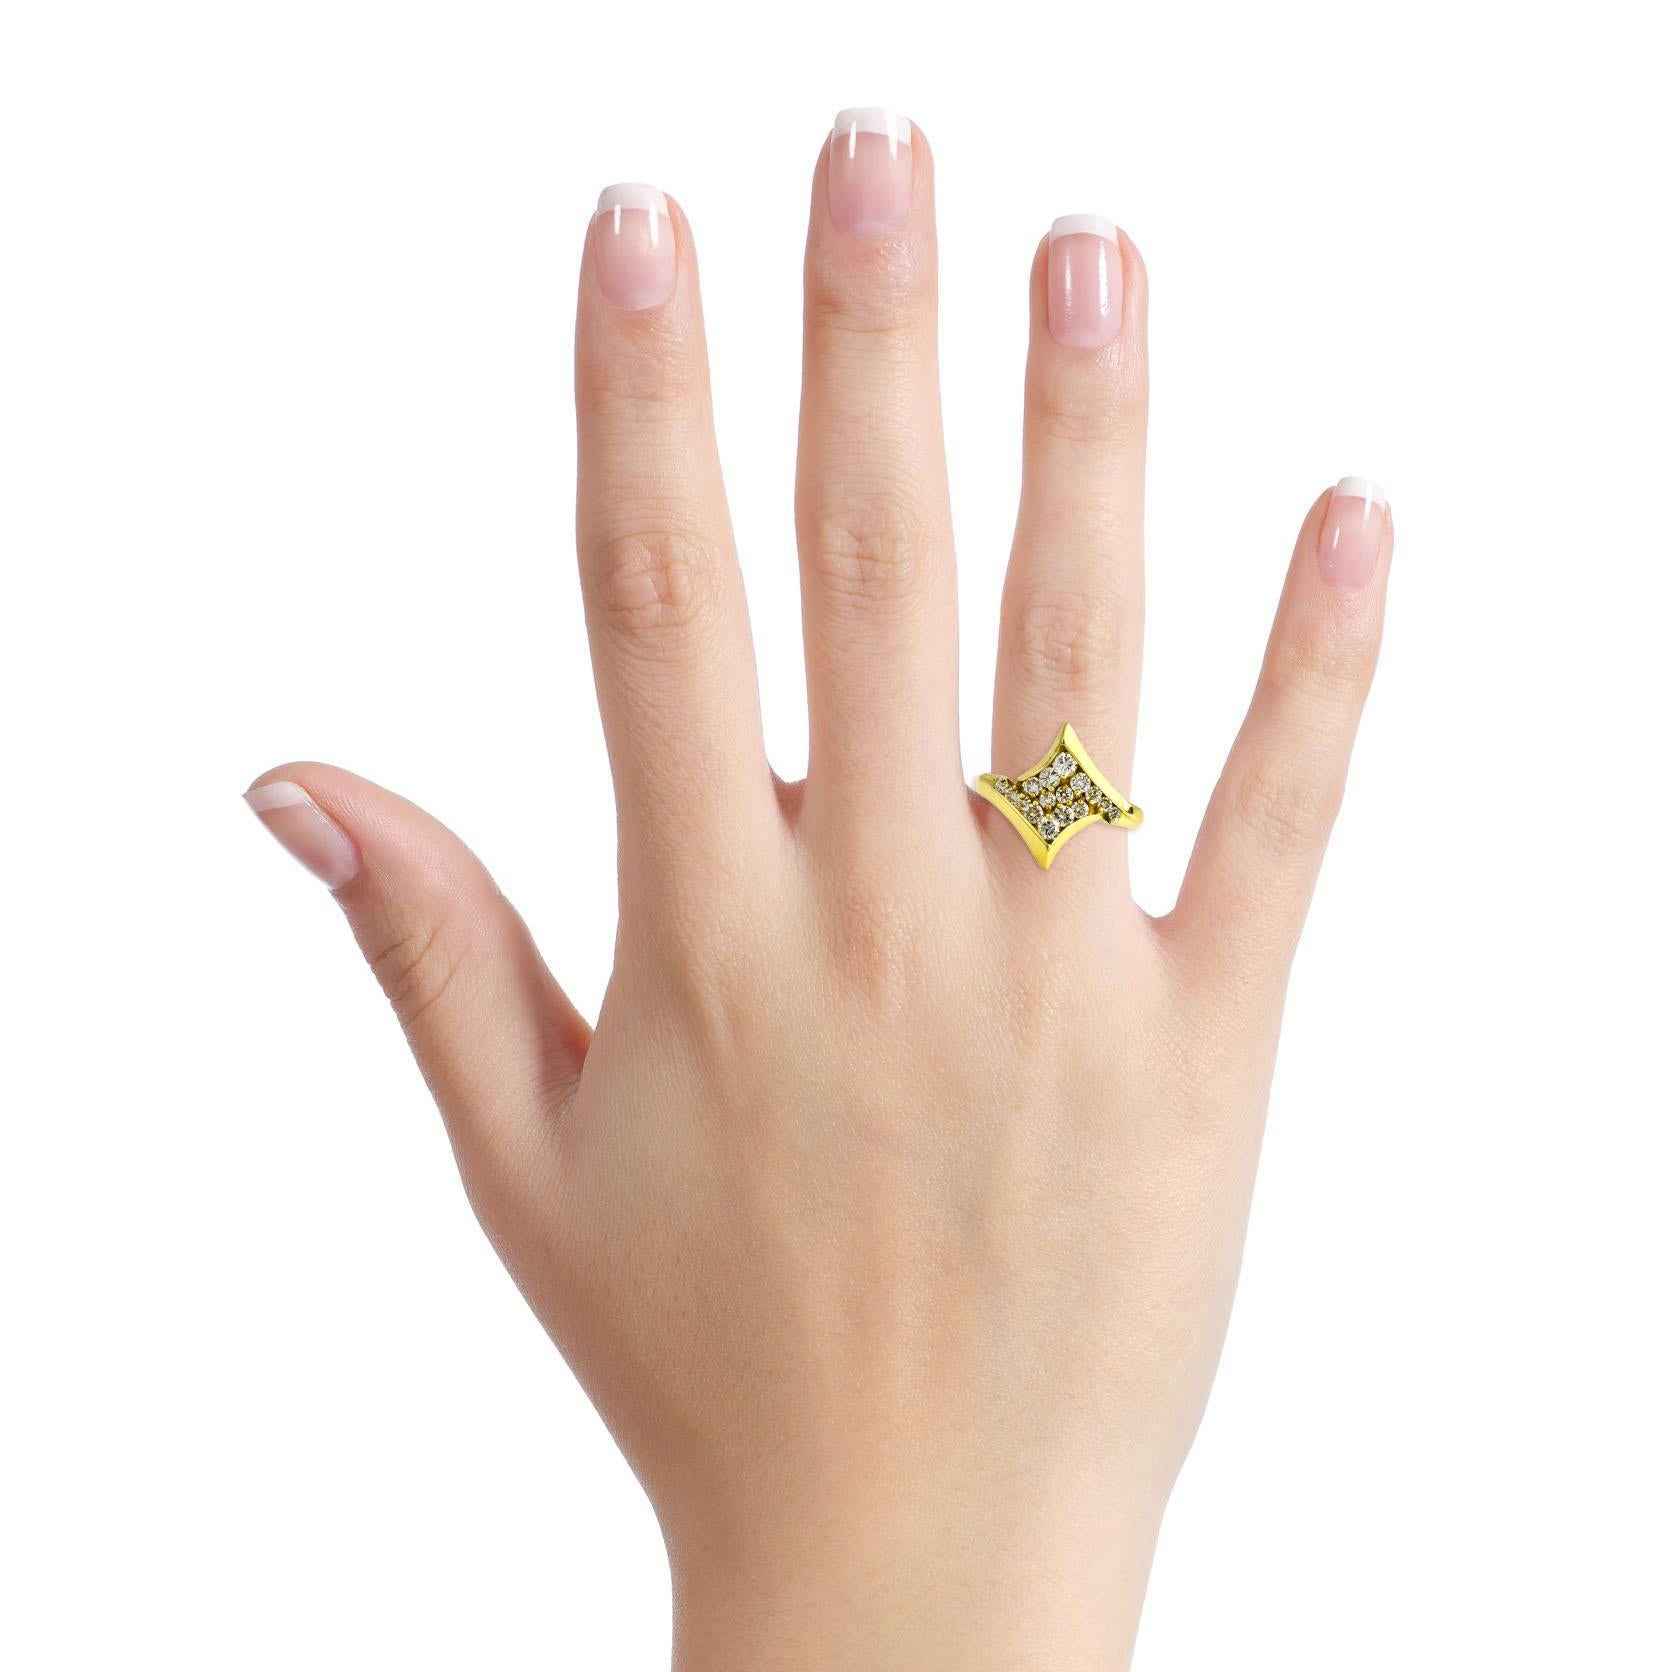 Diamond fashion ring in 18-karat yellow gold. The ring is prong set with 16 brilliant round cut natural diamonds. 

Size, 7
Weight, 7.8 grams
Height, 7mm
Width, 18 - 3mm
Diamond total carat weight, .60 carat. 